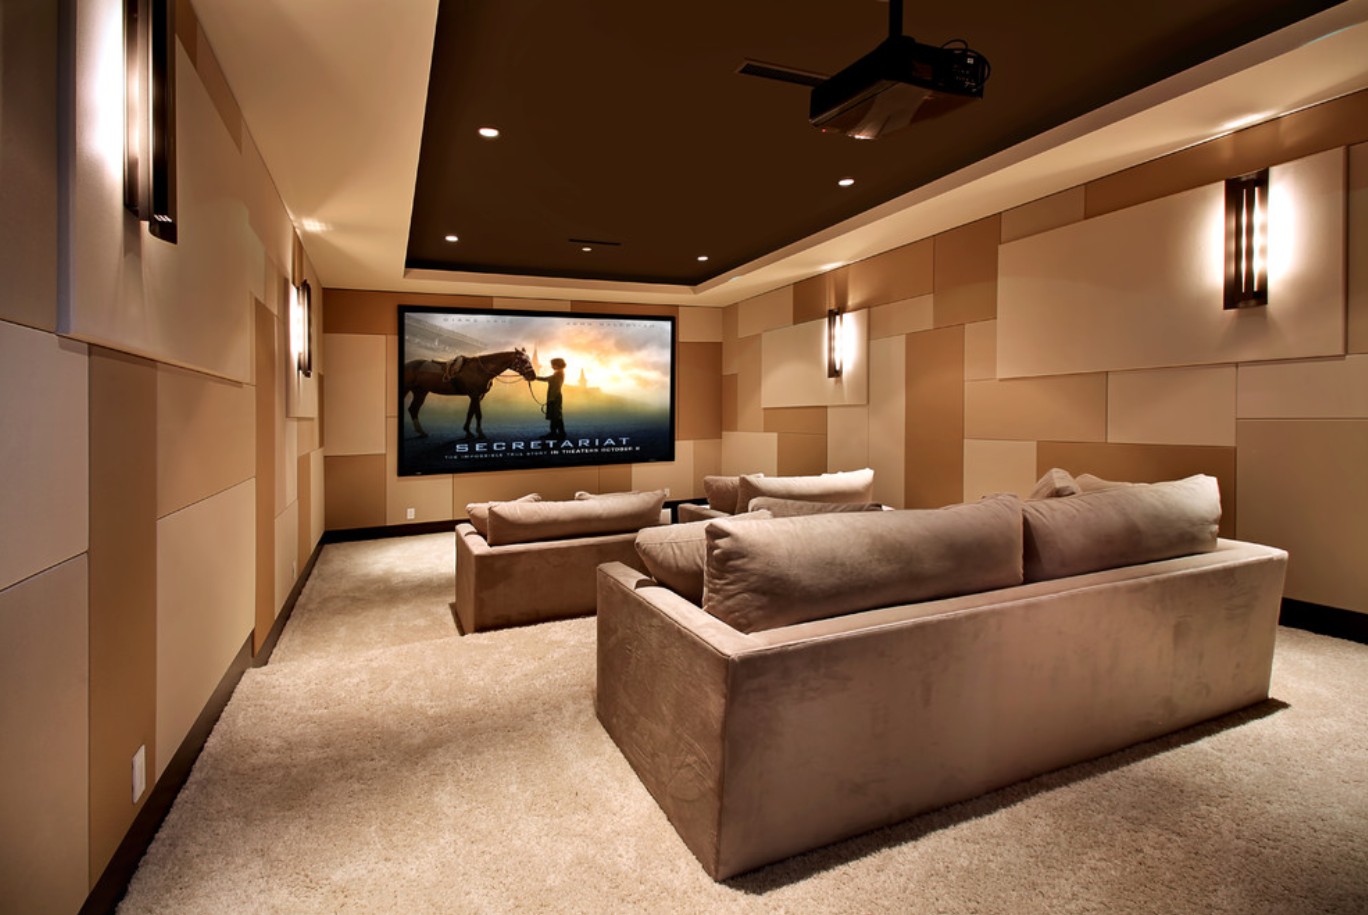 Minimalist Design Ideas For Home Theater Rooms with Simple Decor